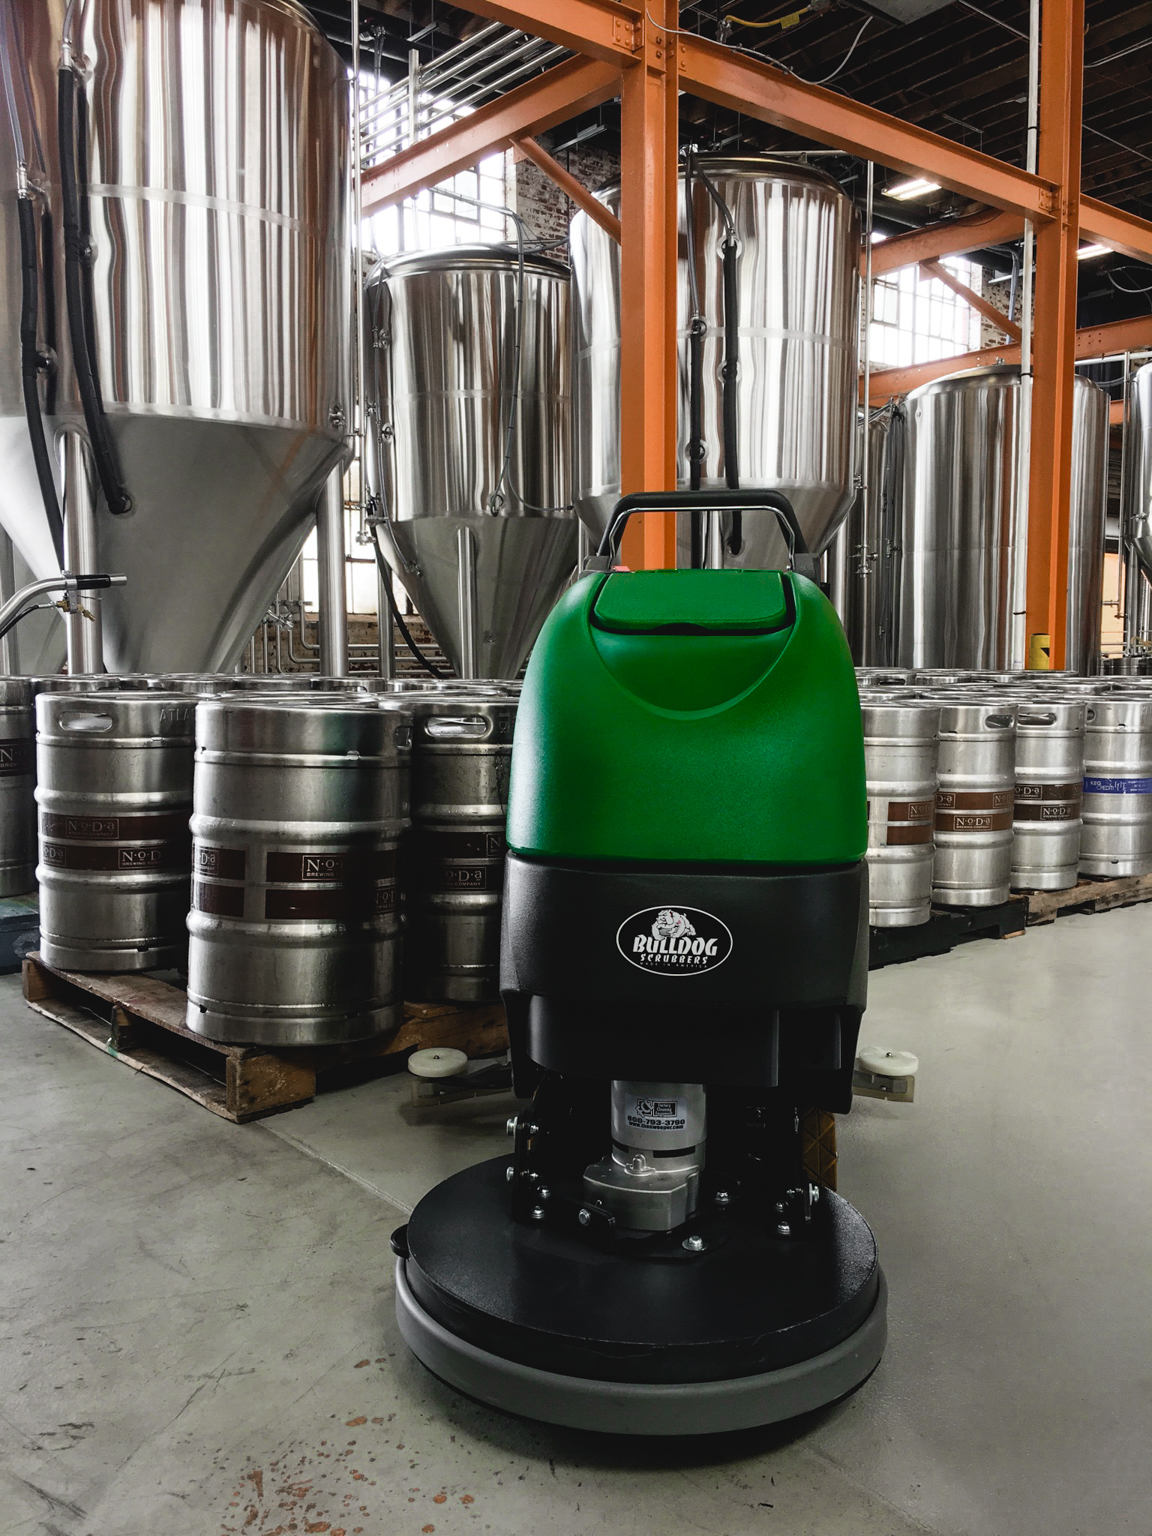 Bulldog WD20 in front of brewery equipment and kegs